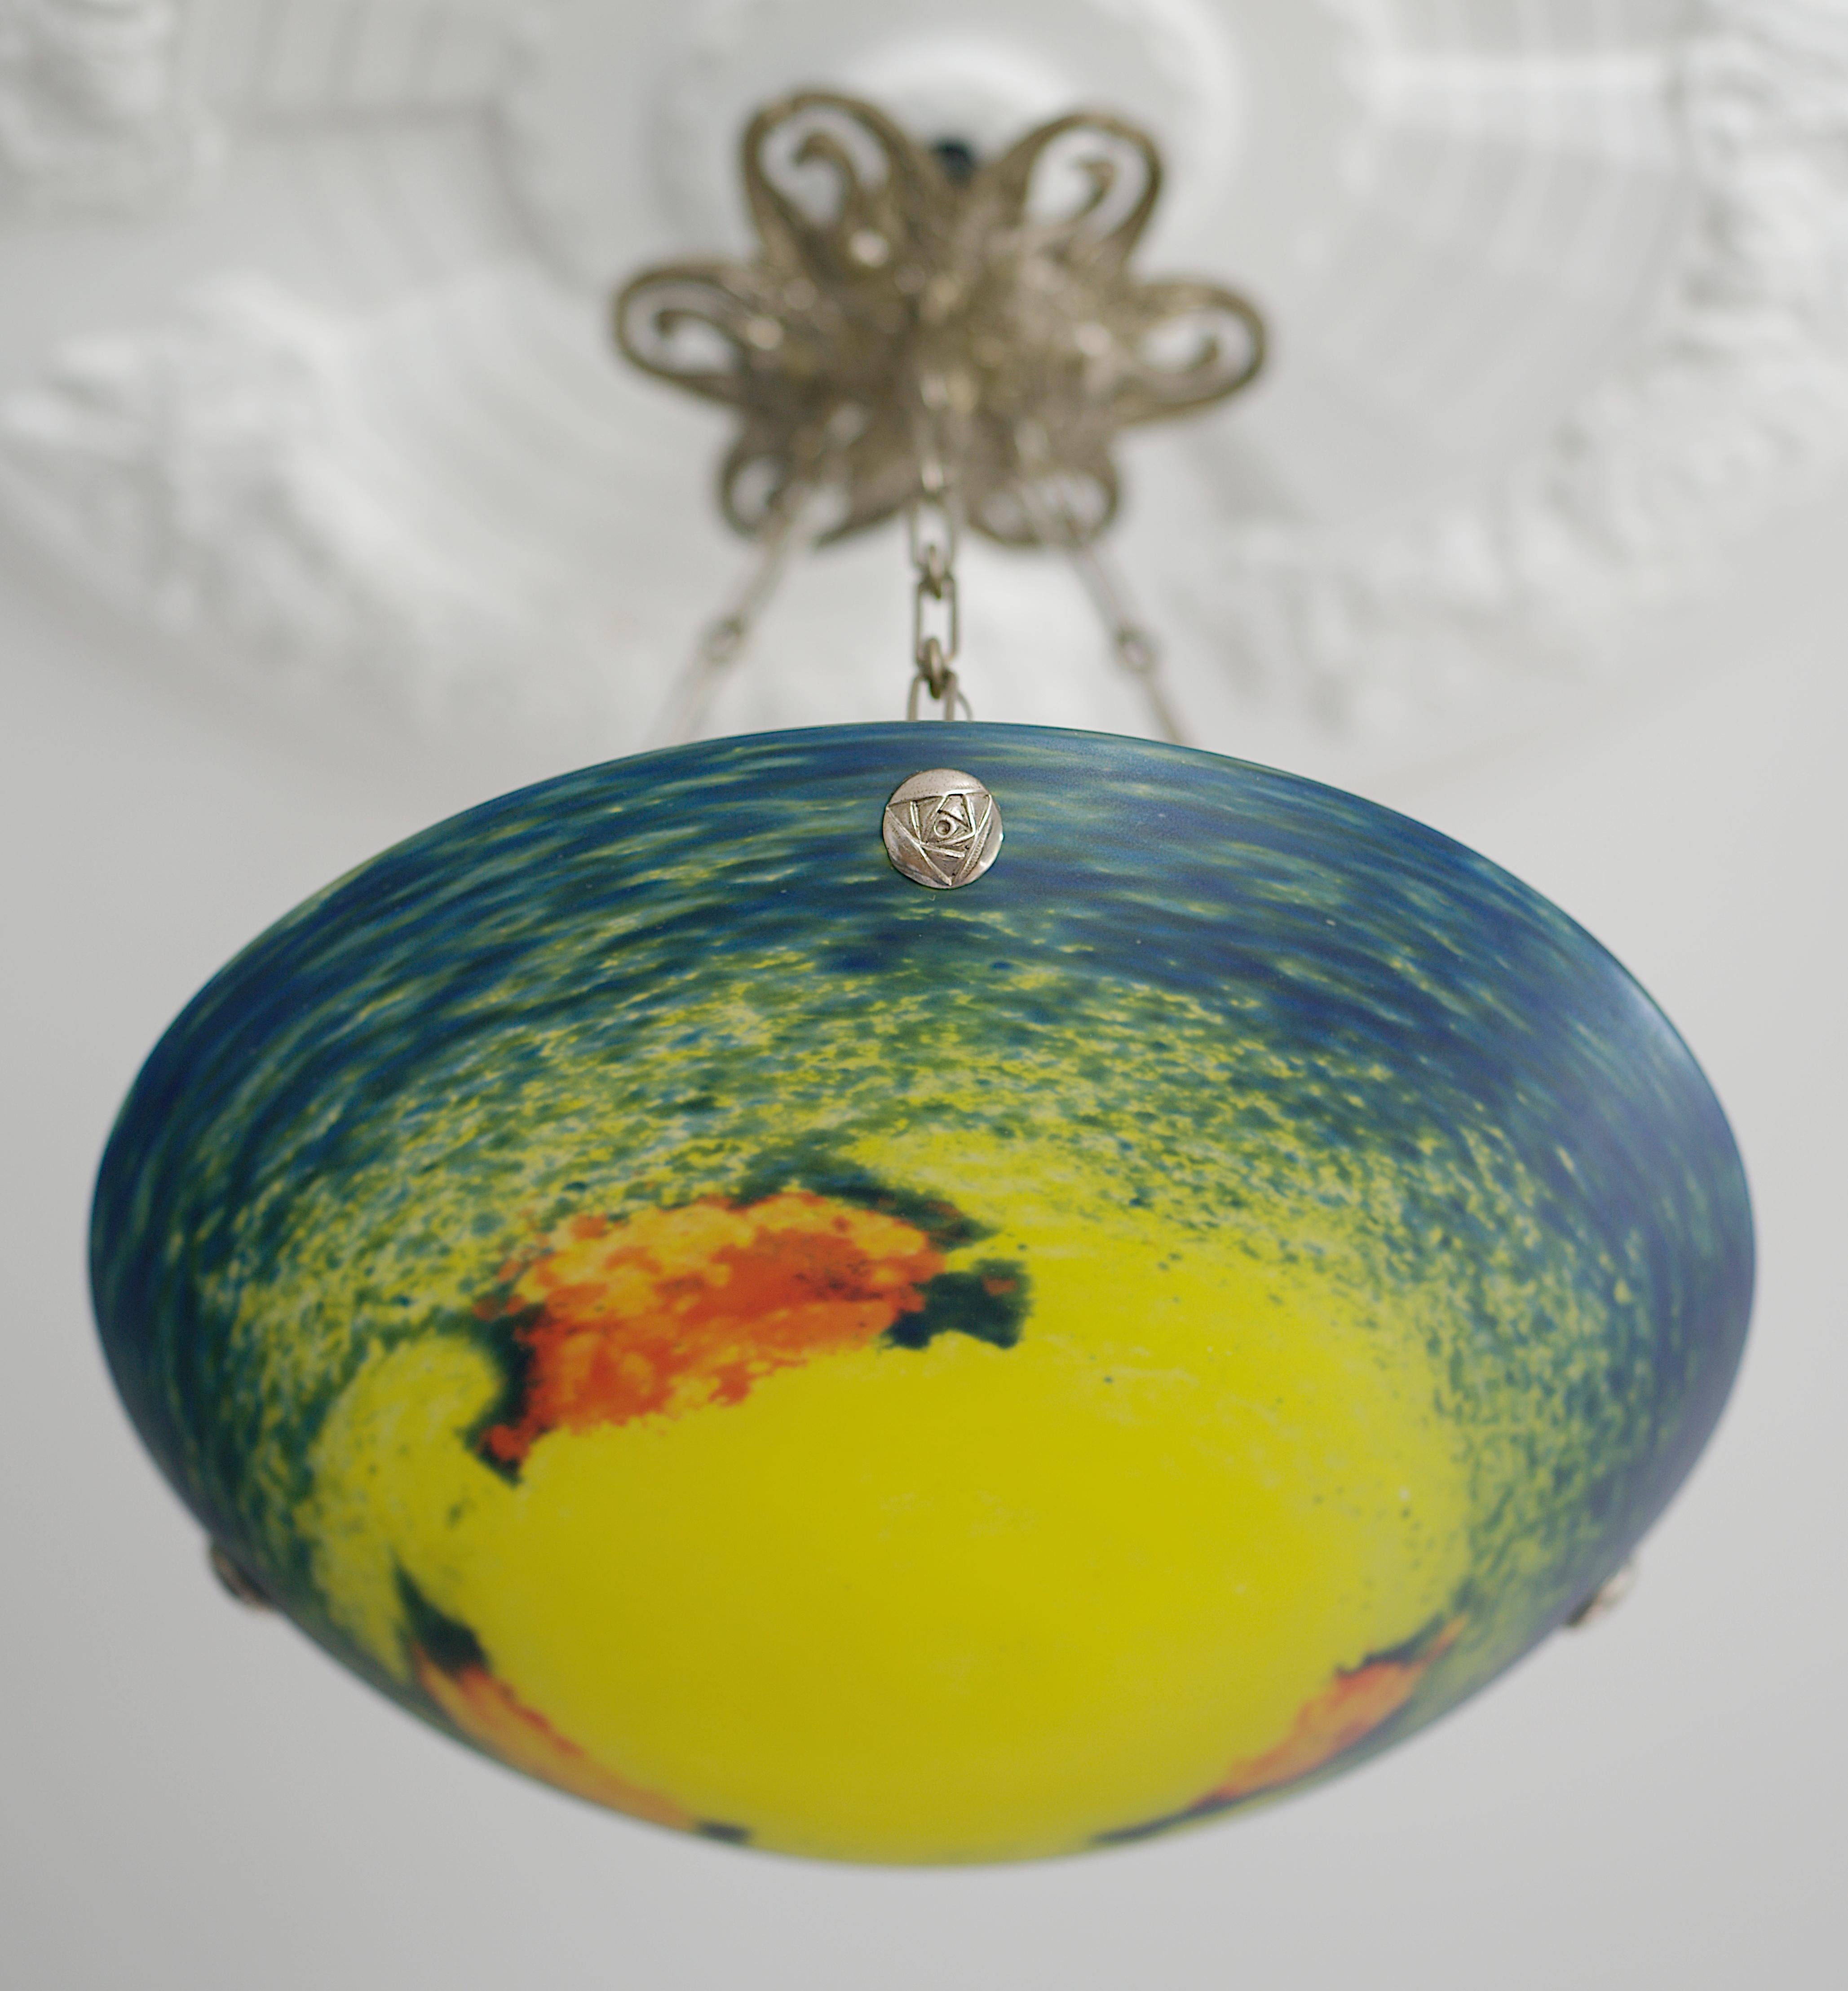 French Art Deco pendant by Jean NOVERDY, Dijon, France, 1920s. Mottled glass shade, powders are applied between two layers that comes hung at its beautiful full bronze fixture. Stunning canopy with swans. Height : 17.3